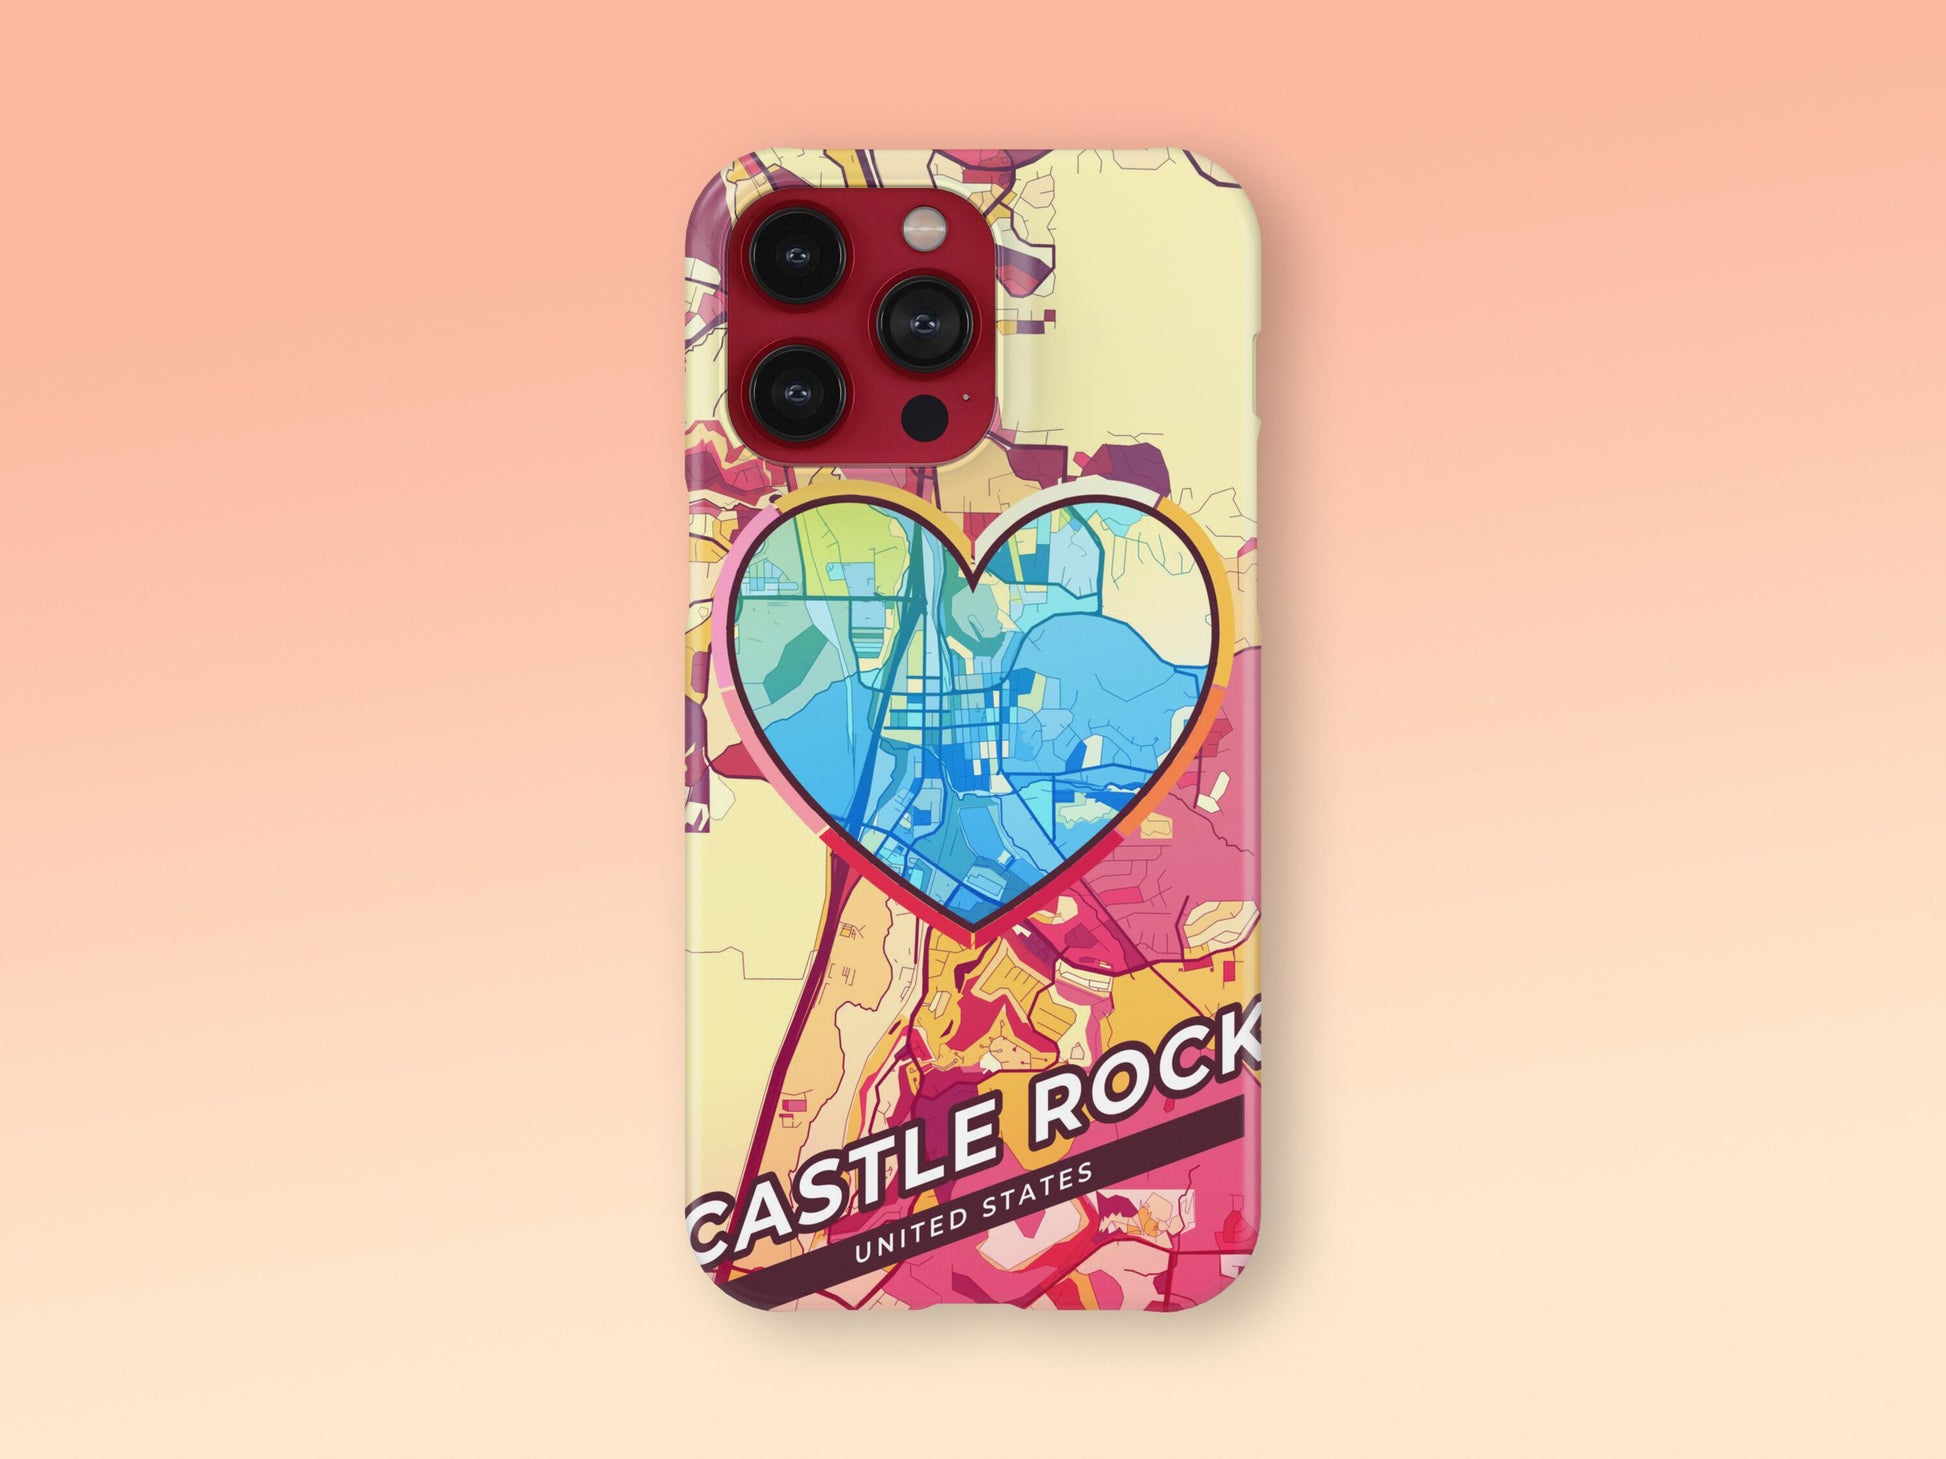 Castle Rock Colorado slim phone case with colorful icon. Birthday, wedding or housewarming gift. Couple match cases. 2